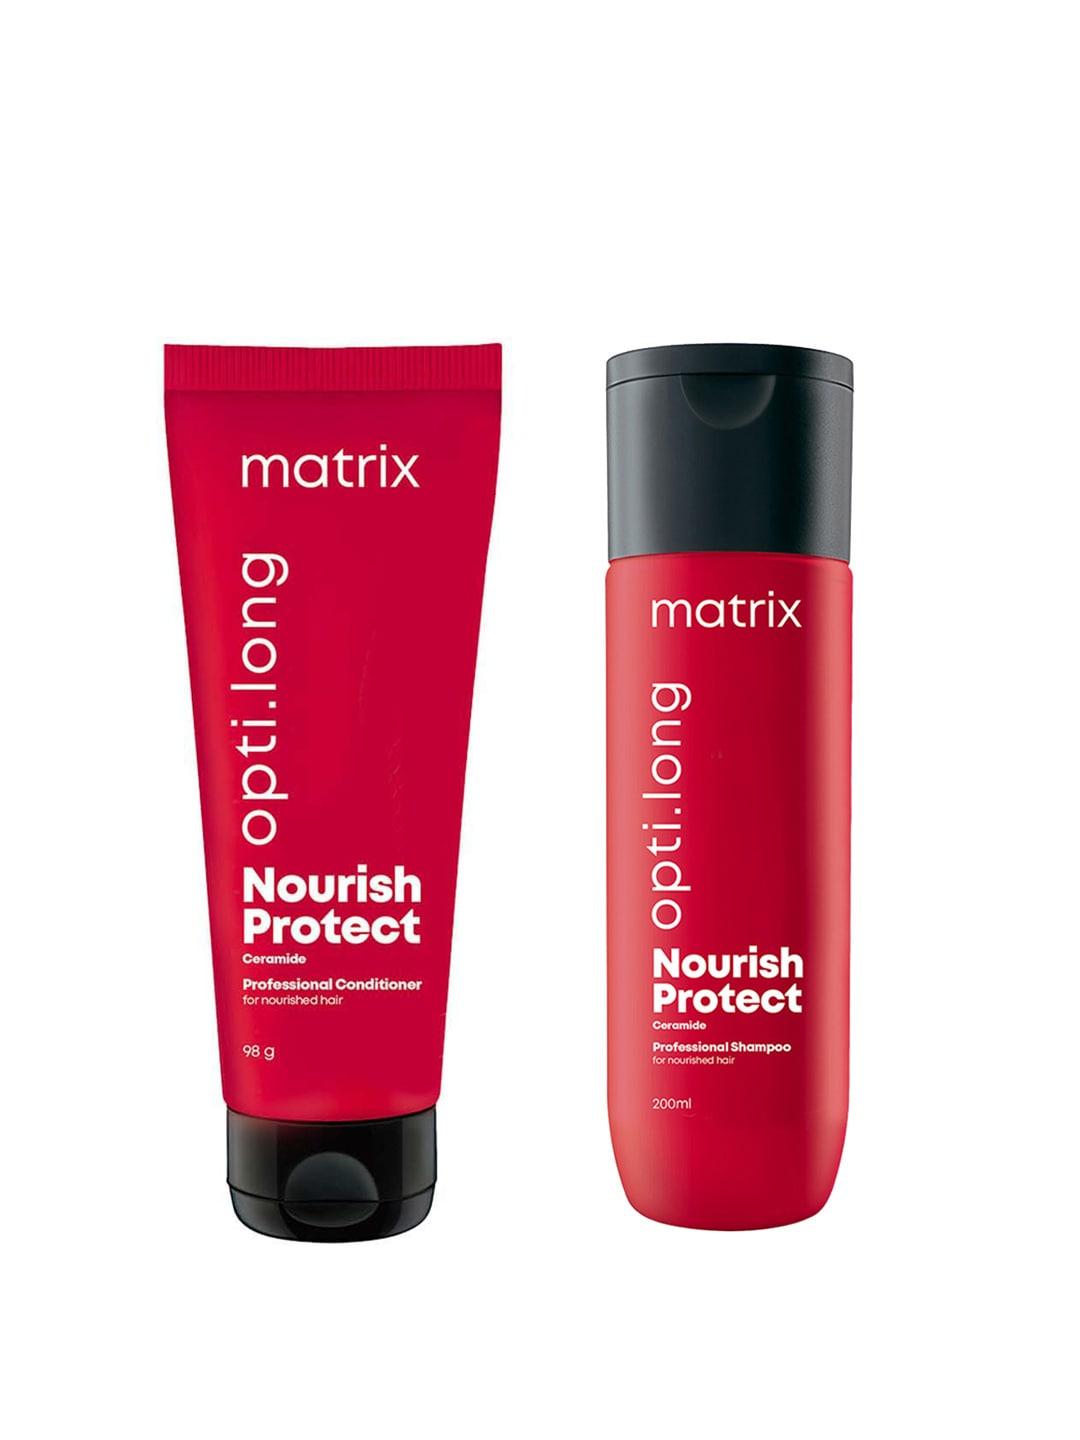 MATRIX Set of Opti Long Shampoo 200 ml + Conditioner 98 g with Ceramides for Dull Hair